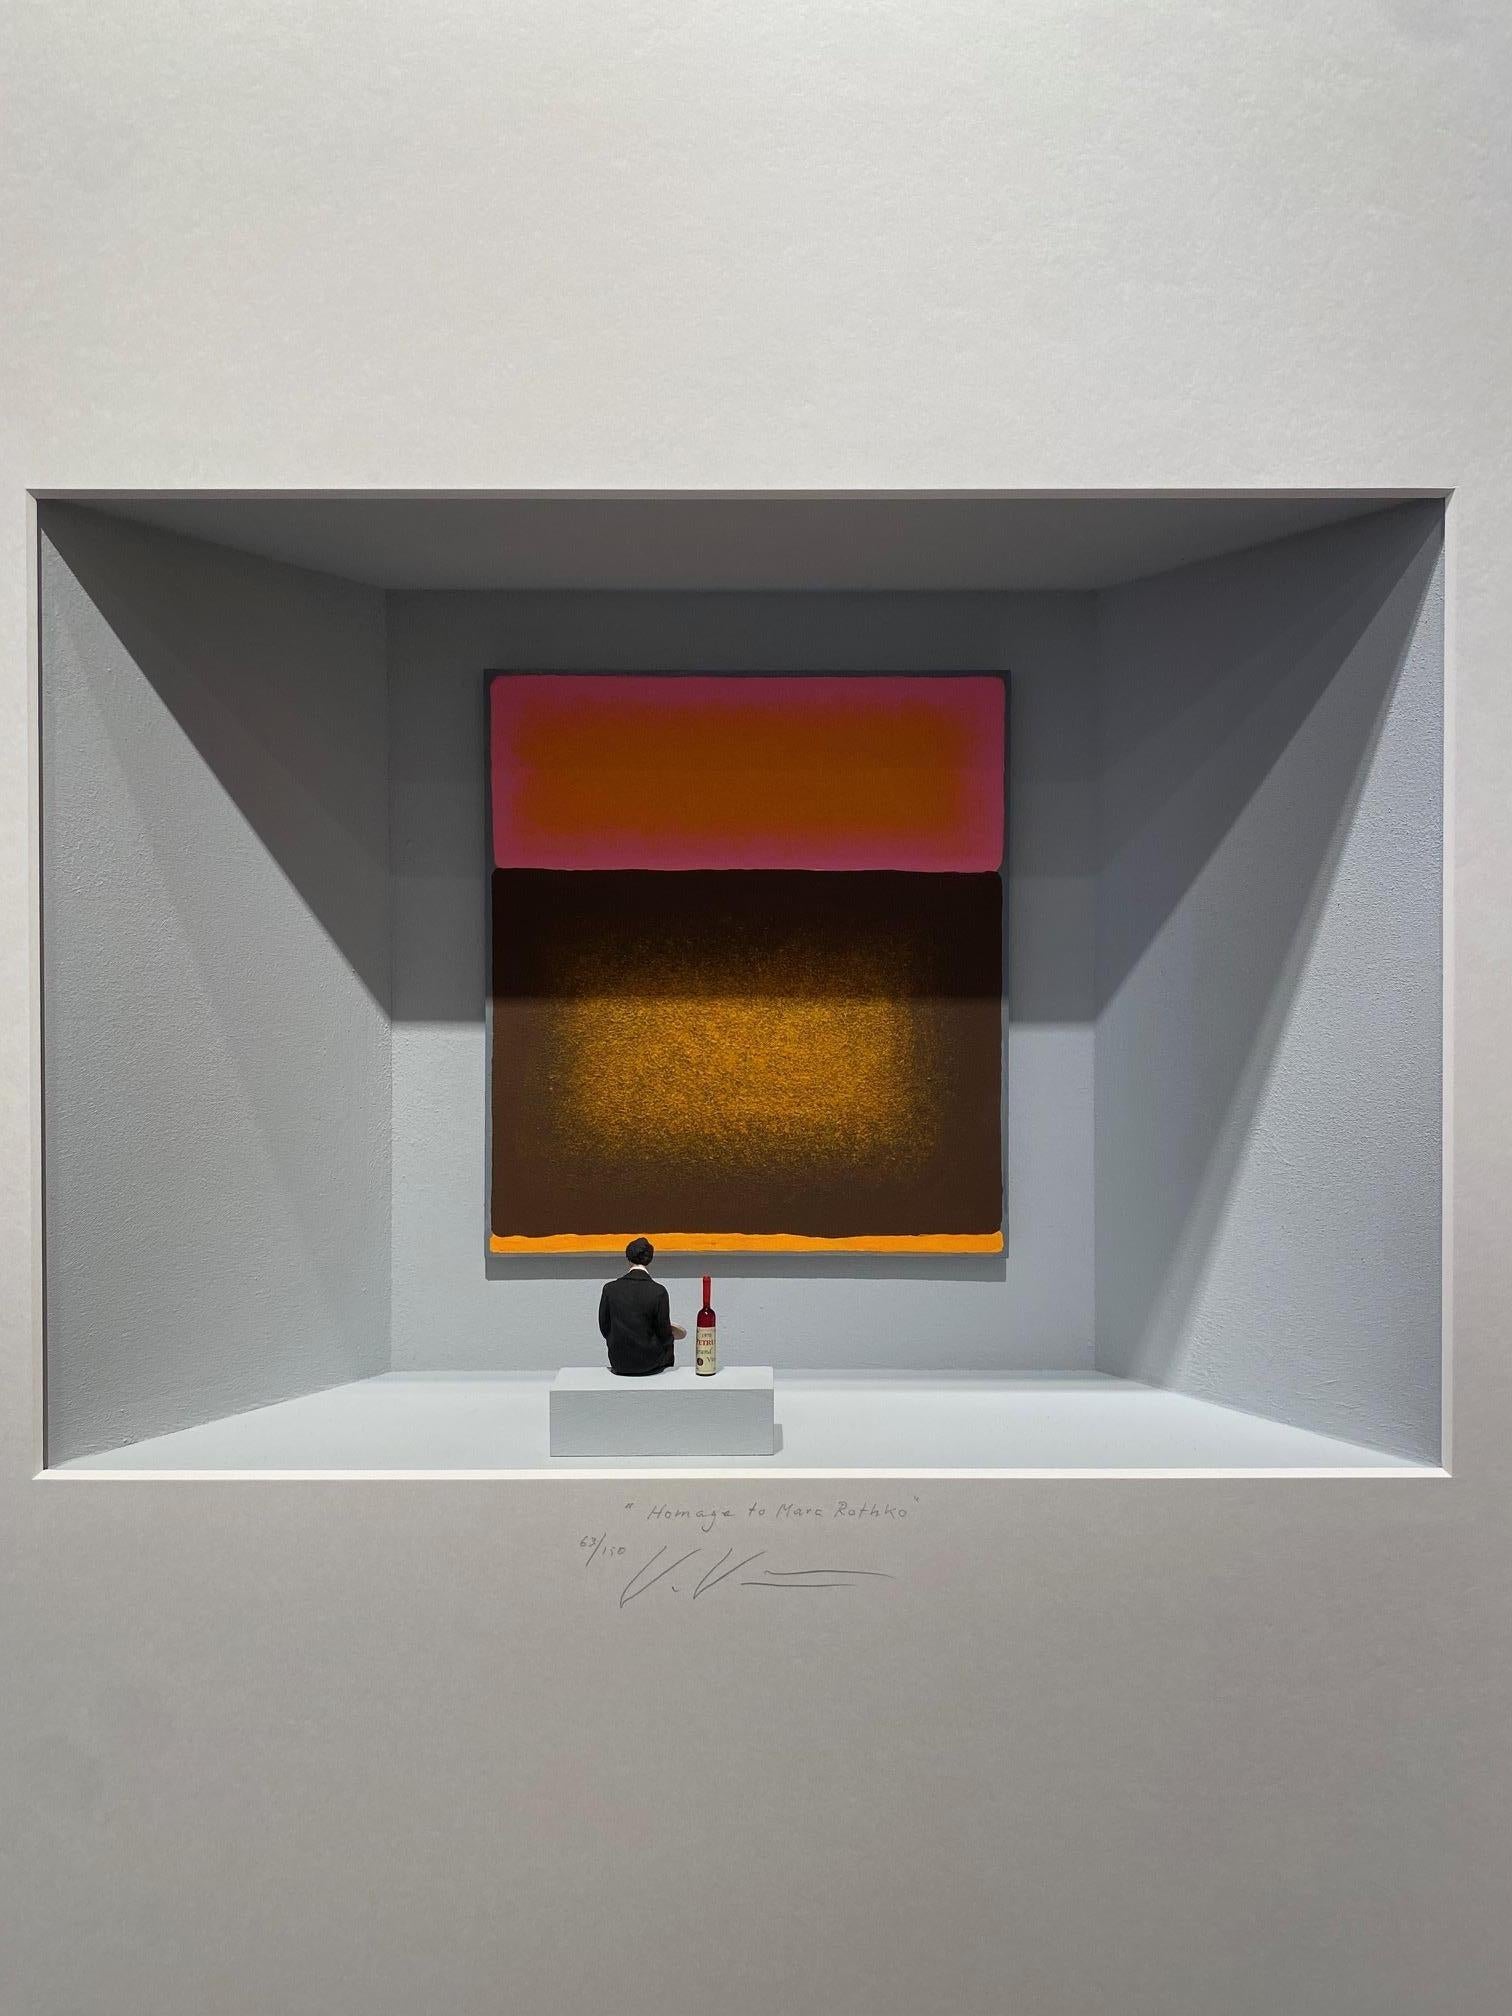 Homage to Rothko-contemporary art in boxes homage to Marc Rothko by Volker Kuhn For Sale 2